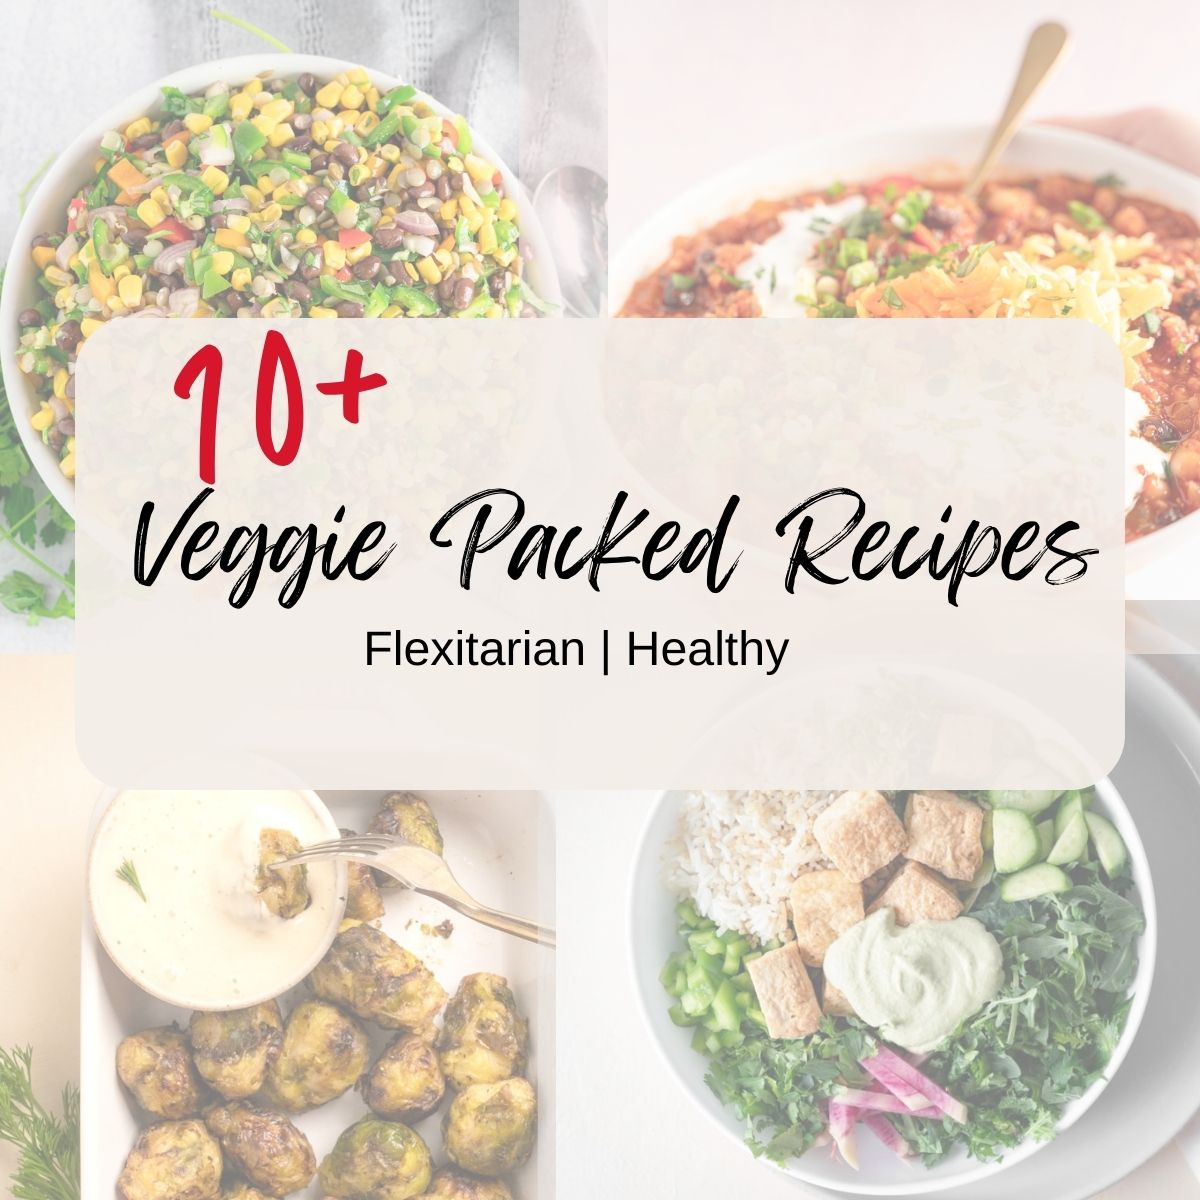 4 translucent dishes in the backgroud with a text overlay saying 10+ veggie packed recipes